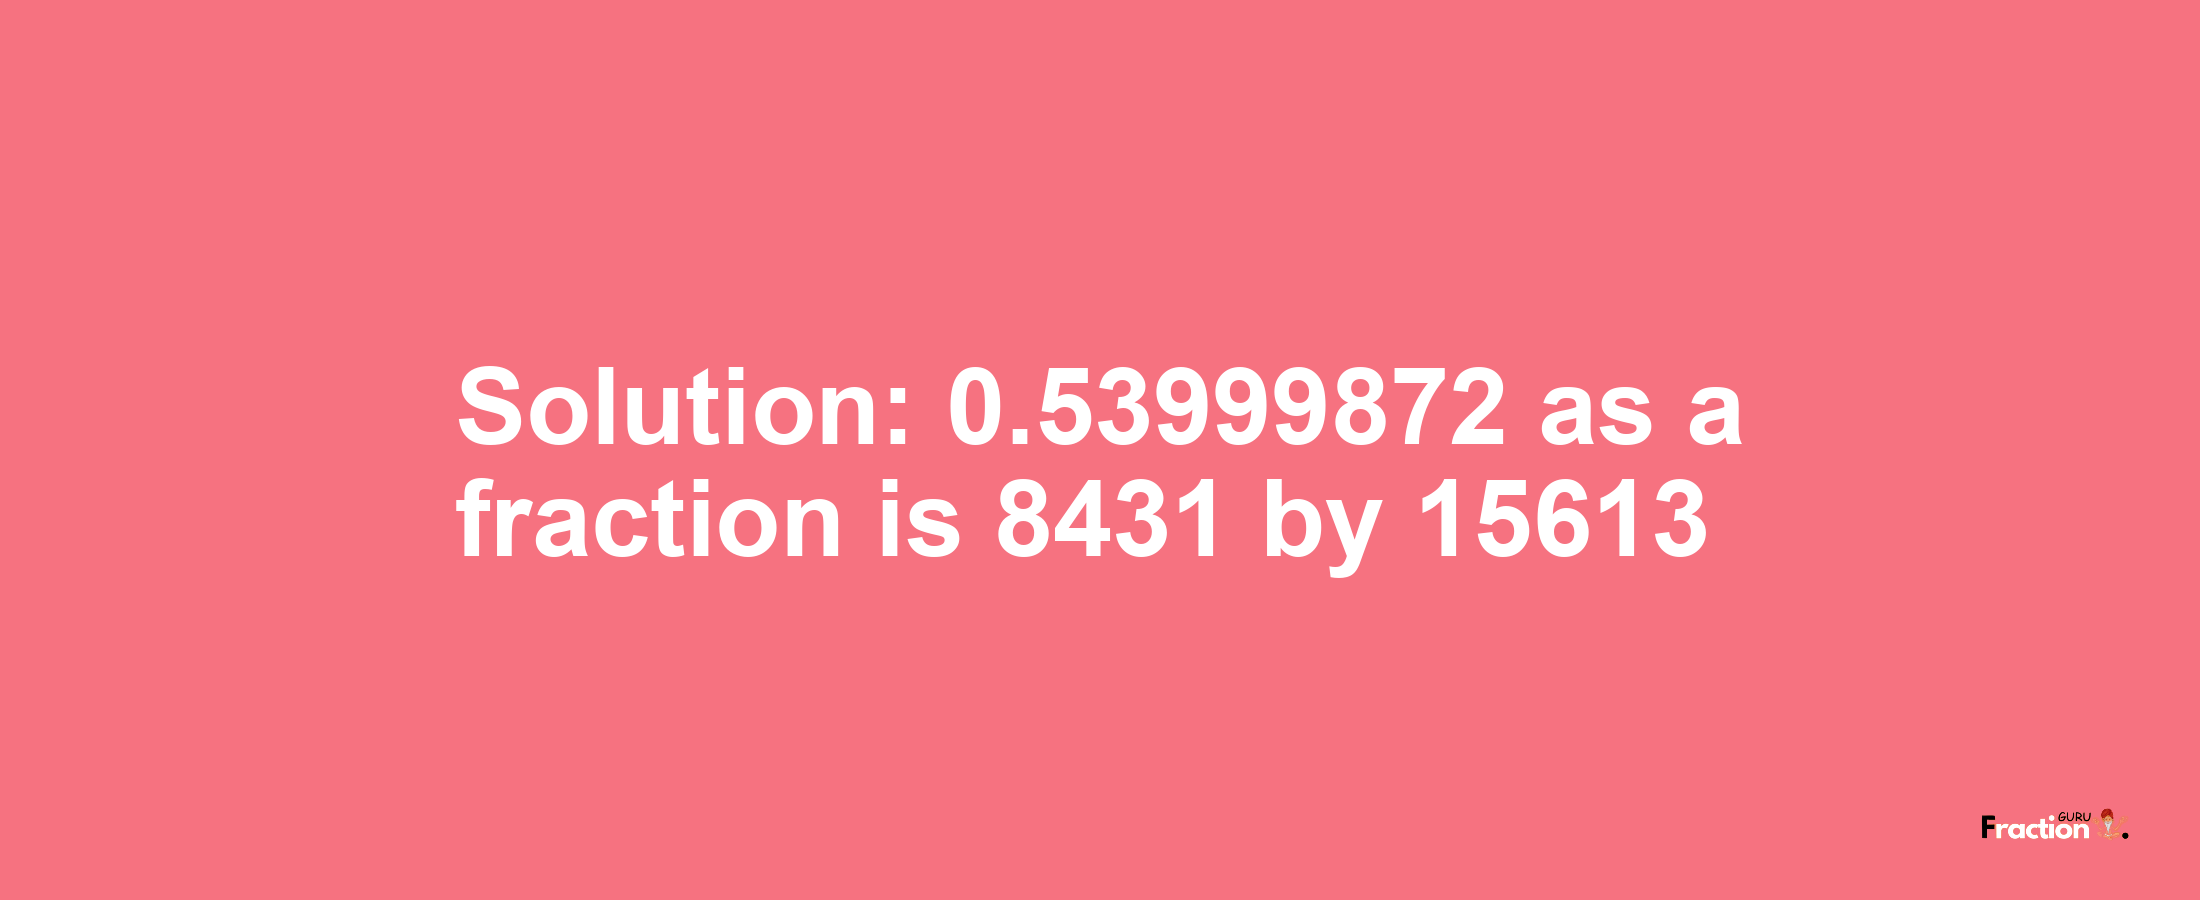 Solution:0.53999872 as a fraction is 8431/15613